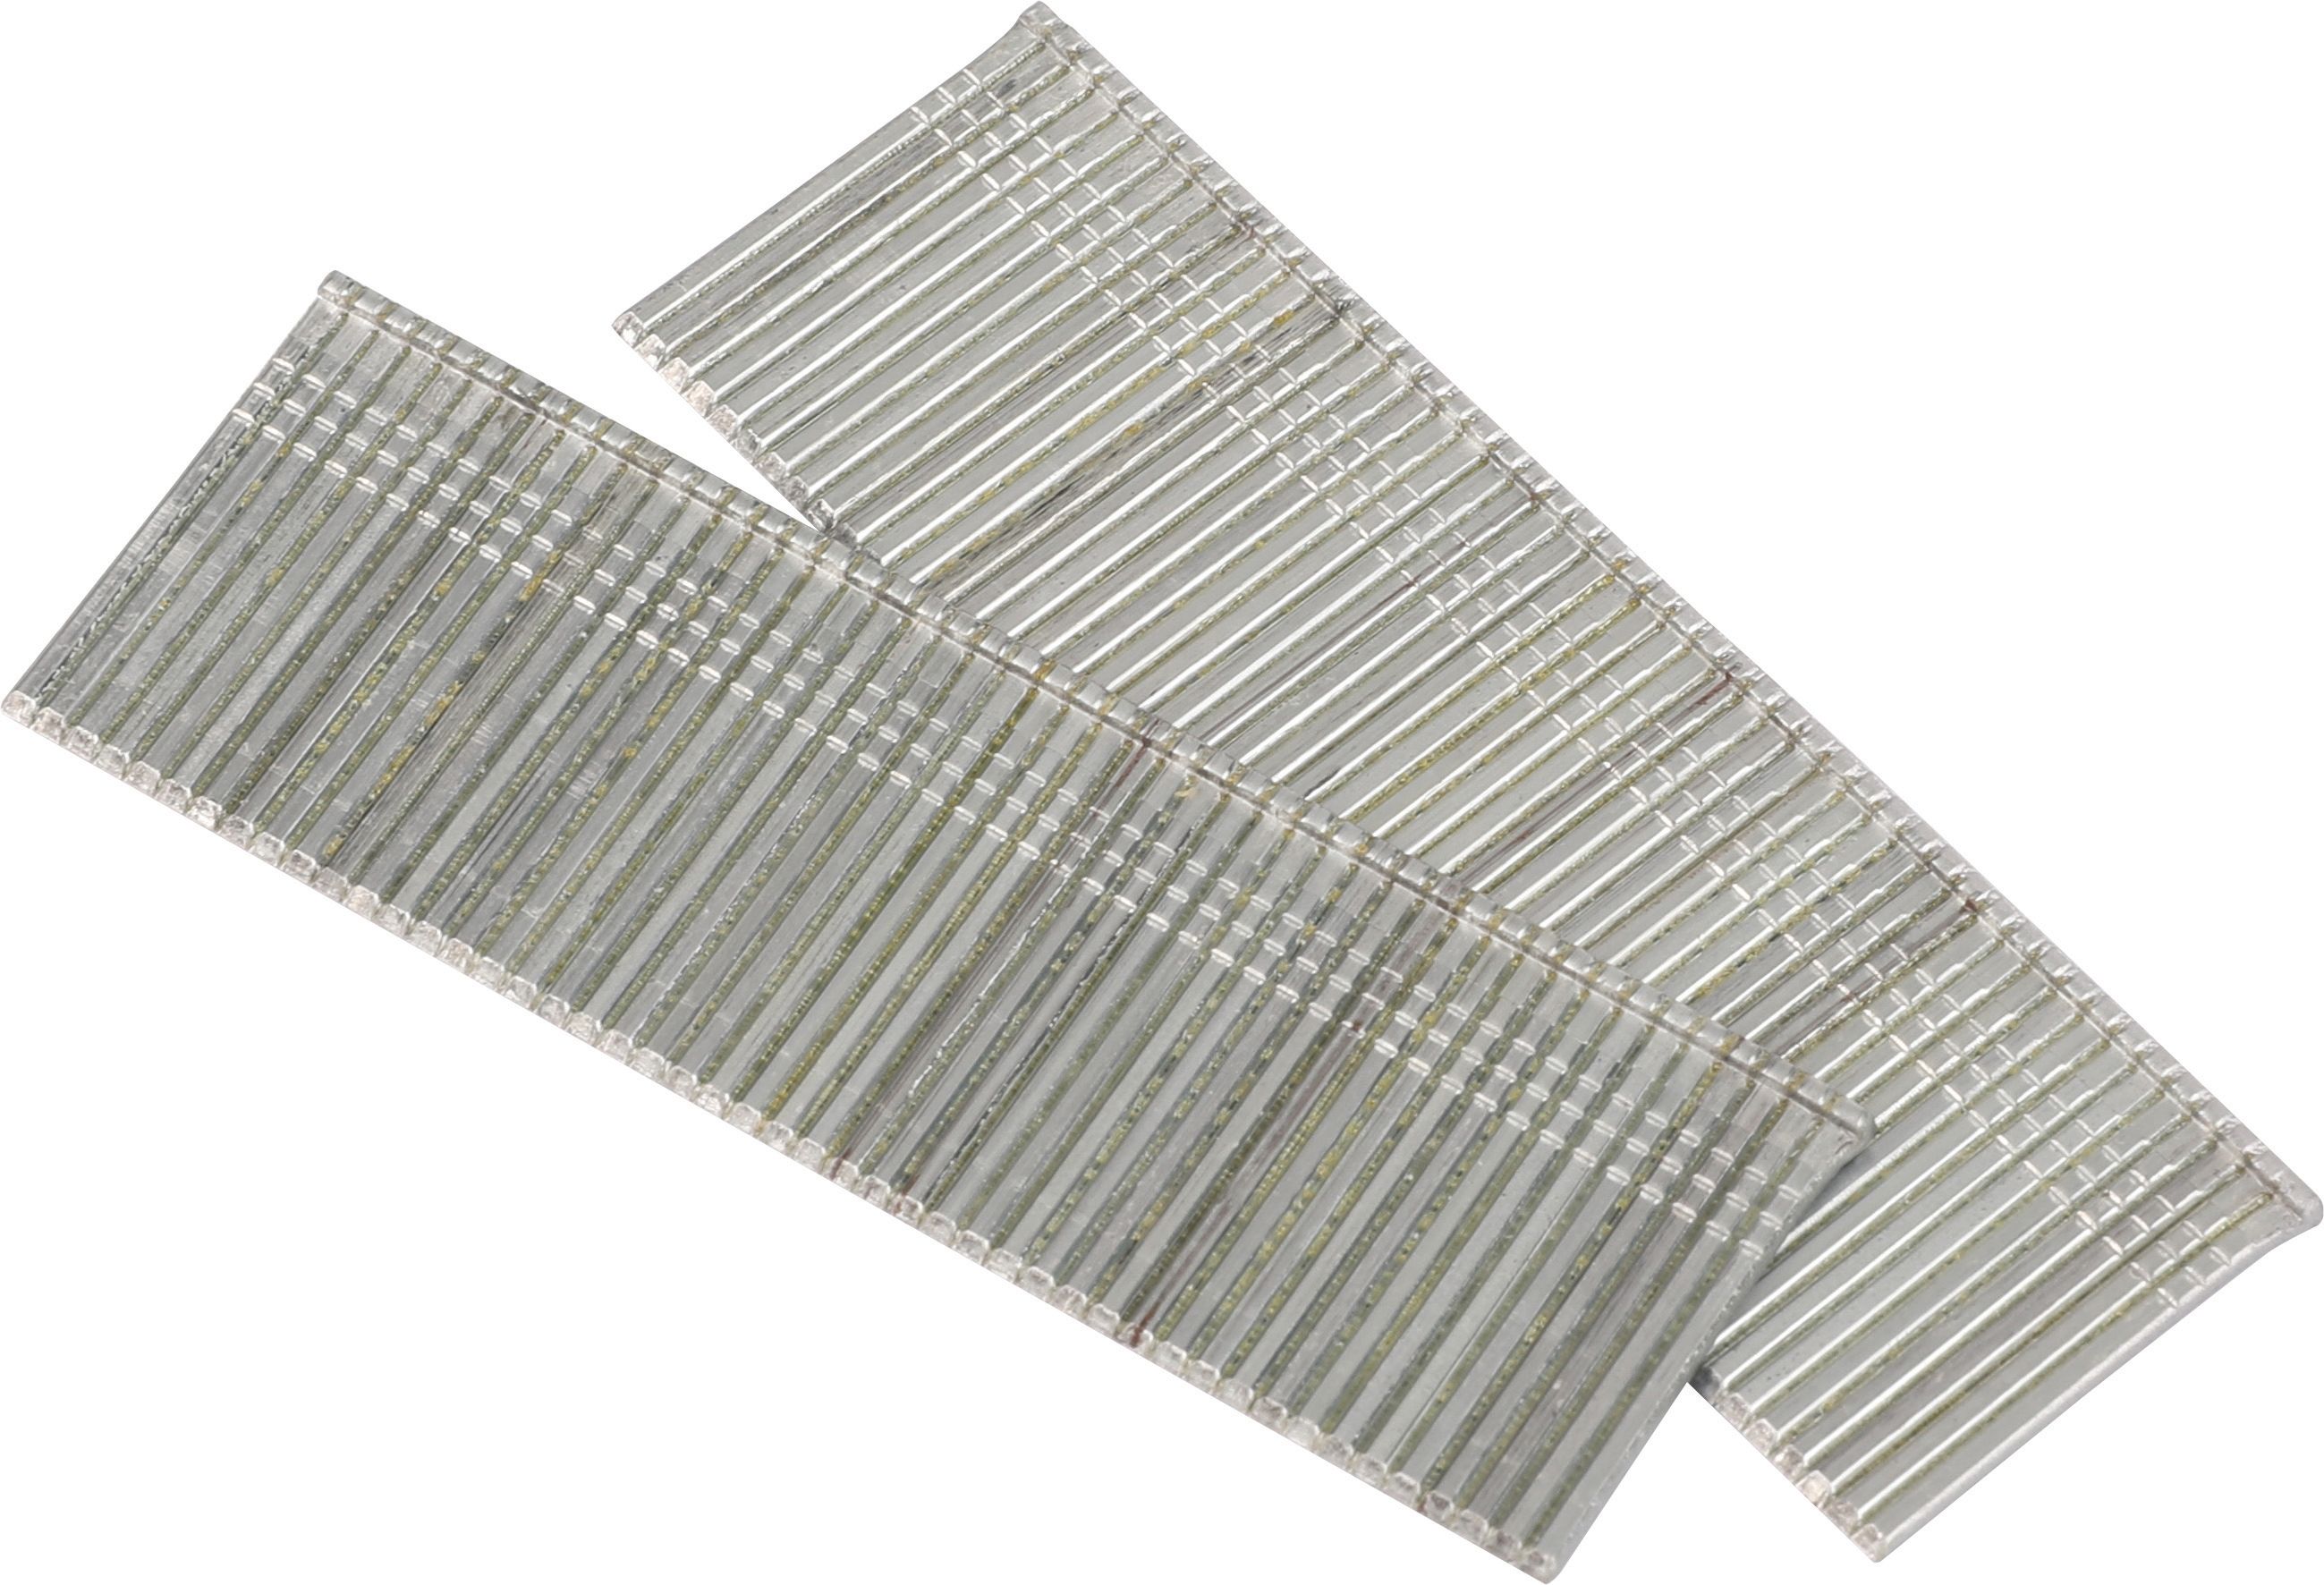 Image of Wickes Brad Nails 25mm Pack 5000